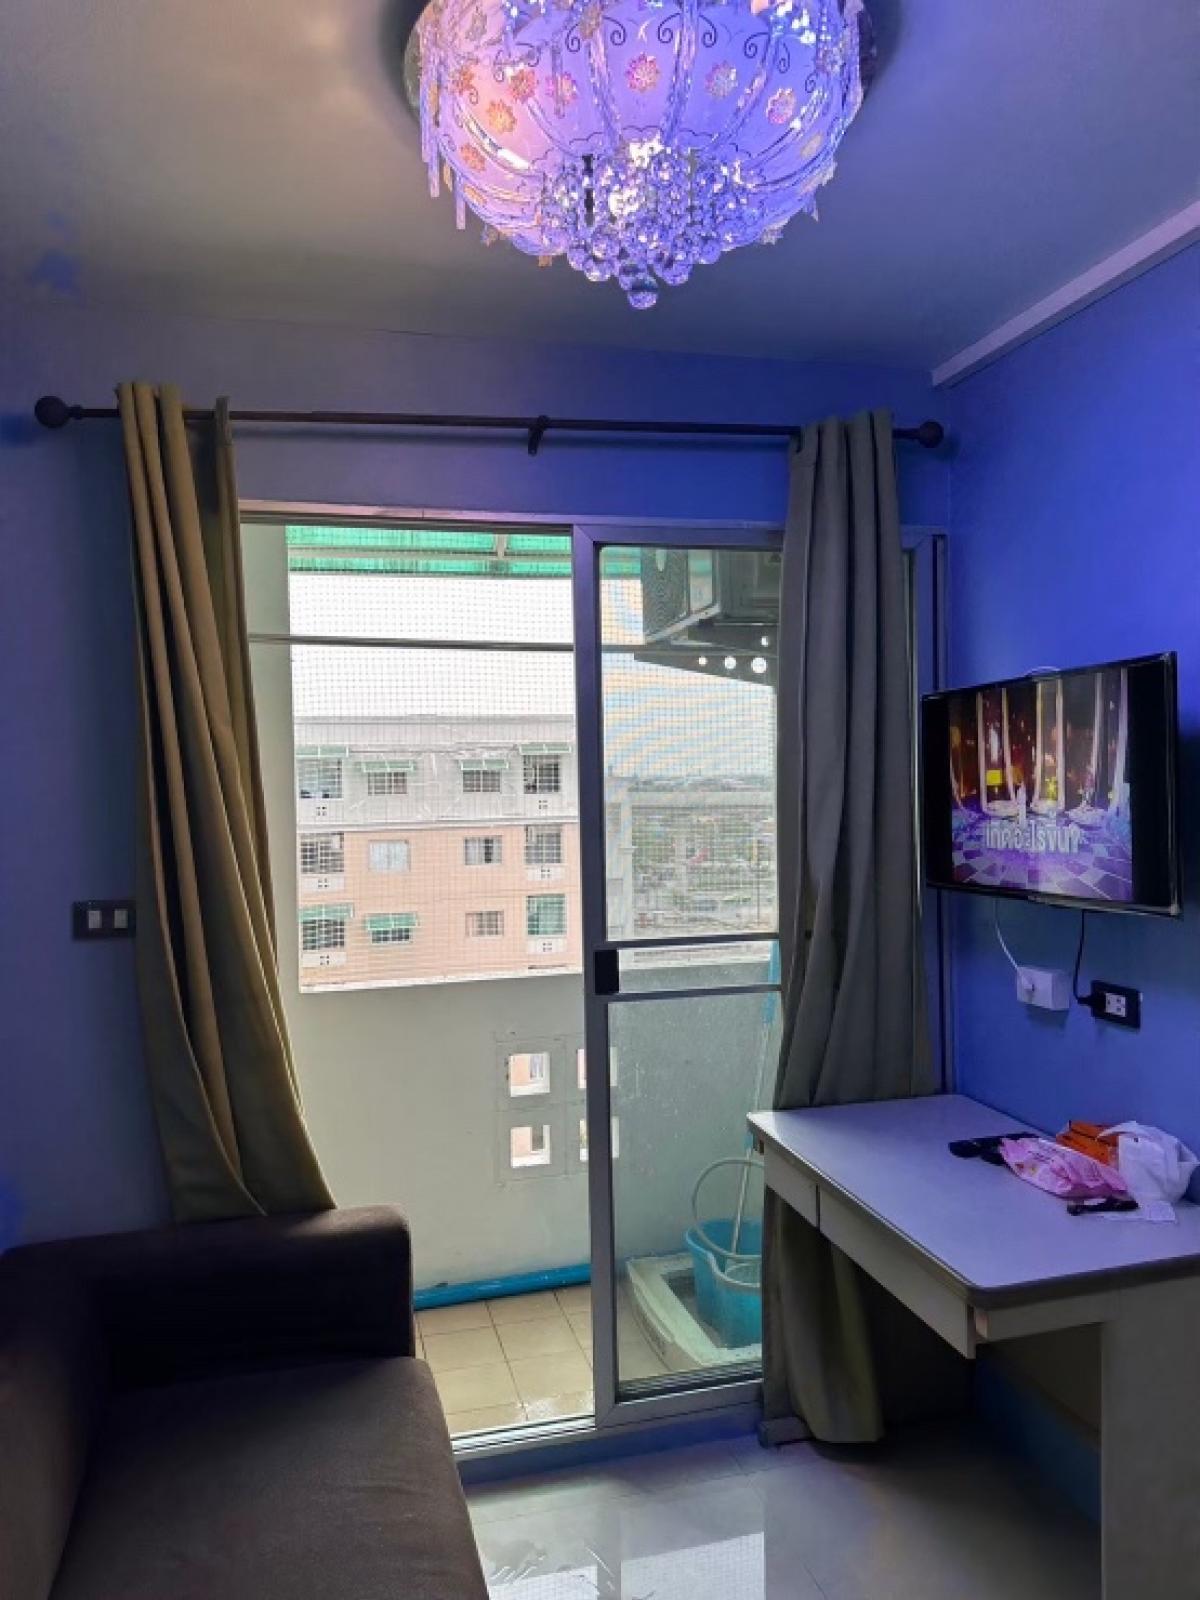 For SaleCondoMin Buri, Romklao : Askan Place Ramkhamhaeng Ring Road 147/2, 8th floor, Building 2, the best view in the project, windy, airy, not stuffy, corner zone, fully furnished, ready for renters to pay in installments easily. Can raise pets Just renovated, very worth it.